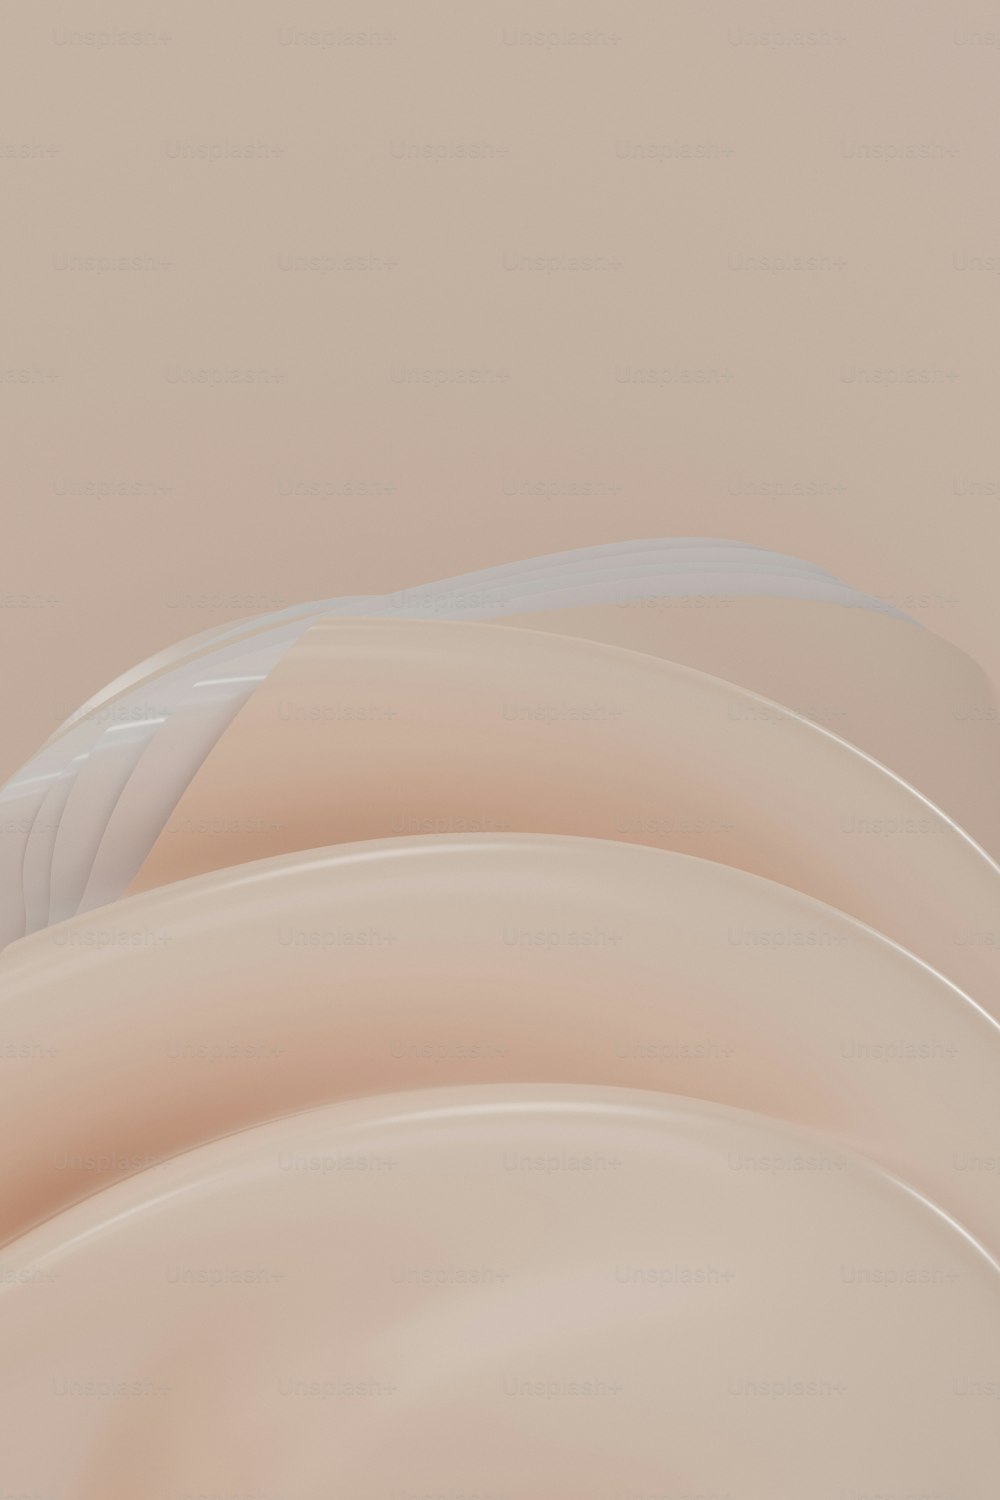 an abstract photo of a curved beige object